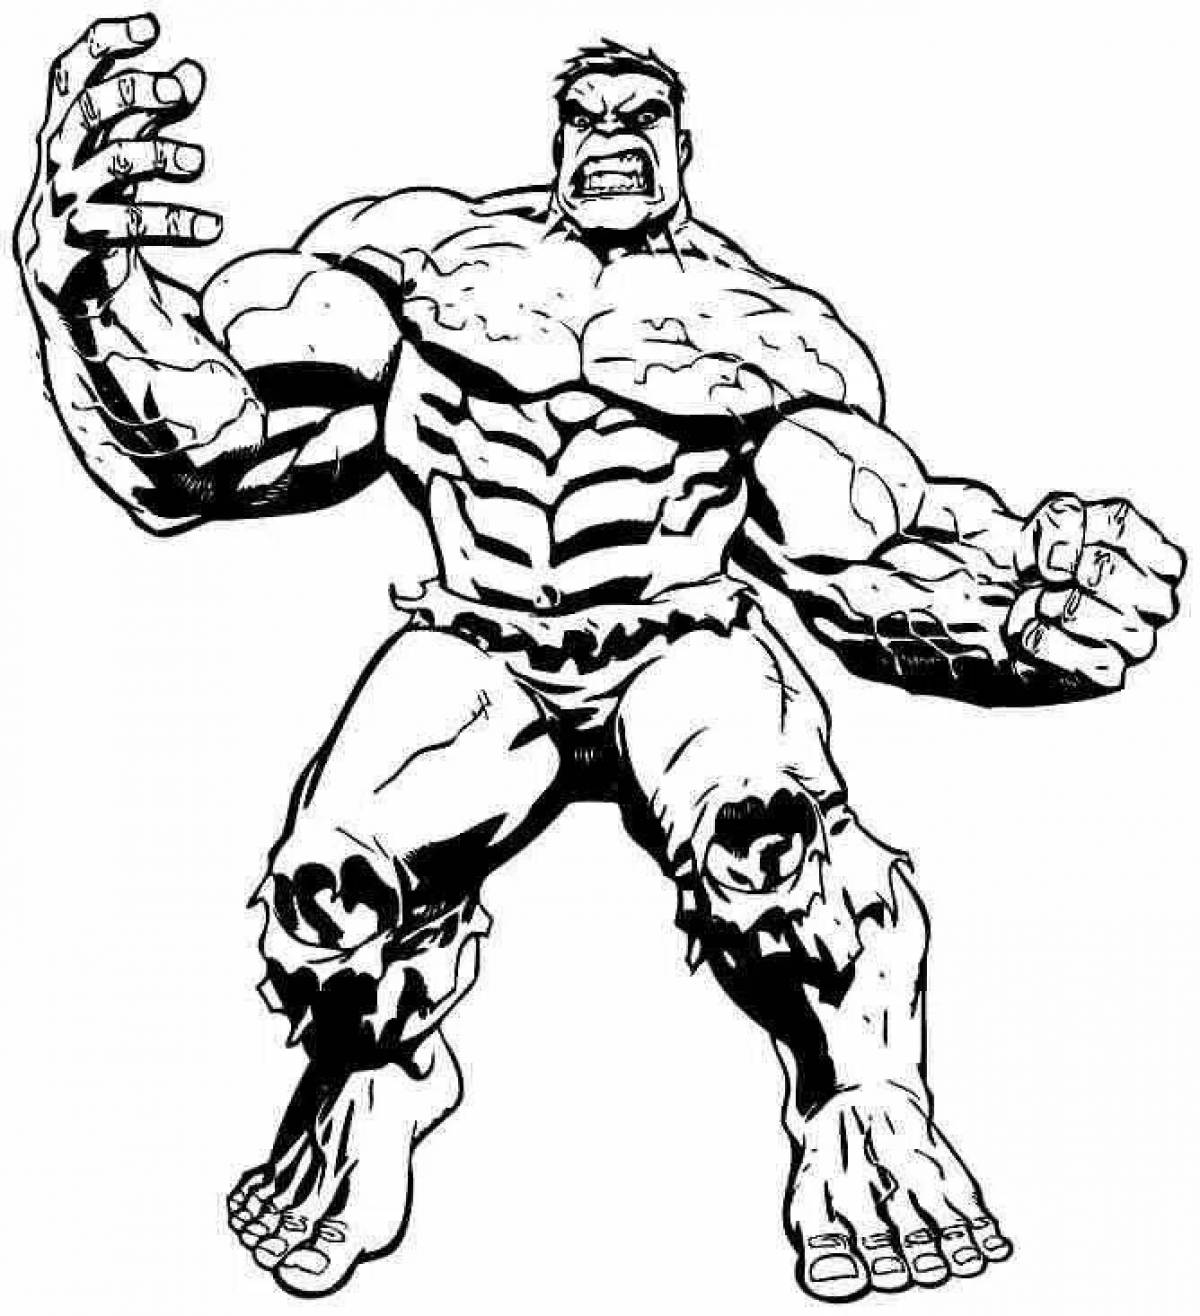 Amazing Hulk Coloring Page for 6-7 year olds